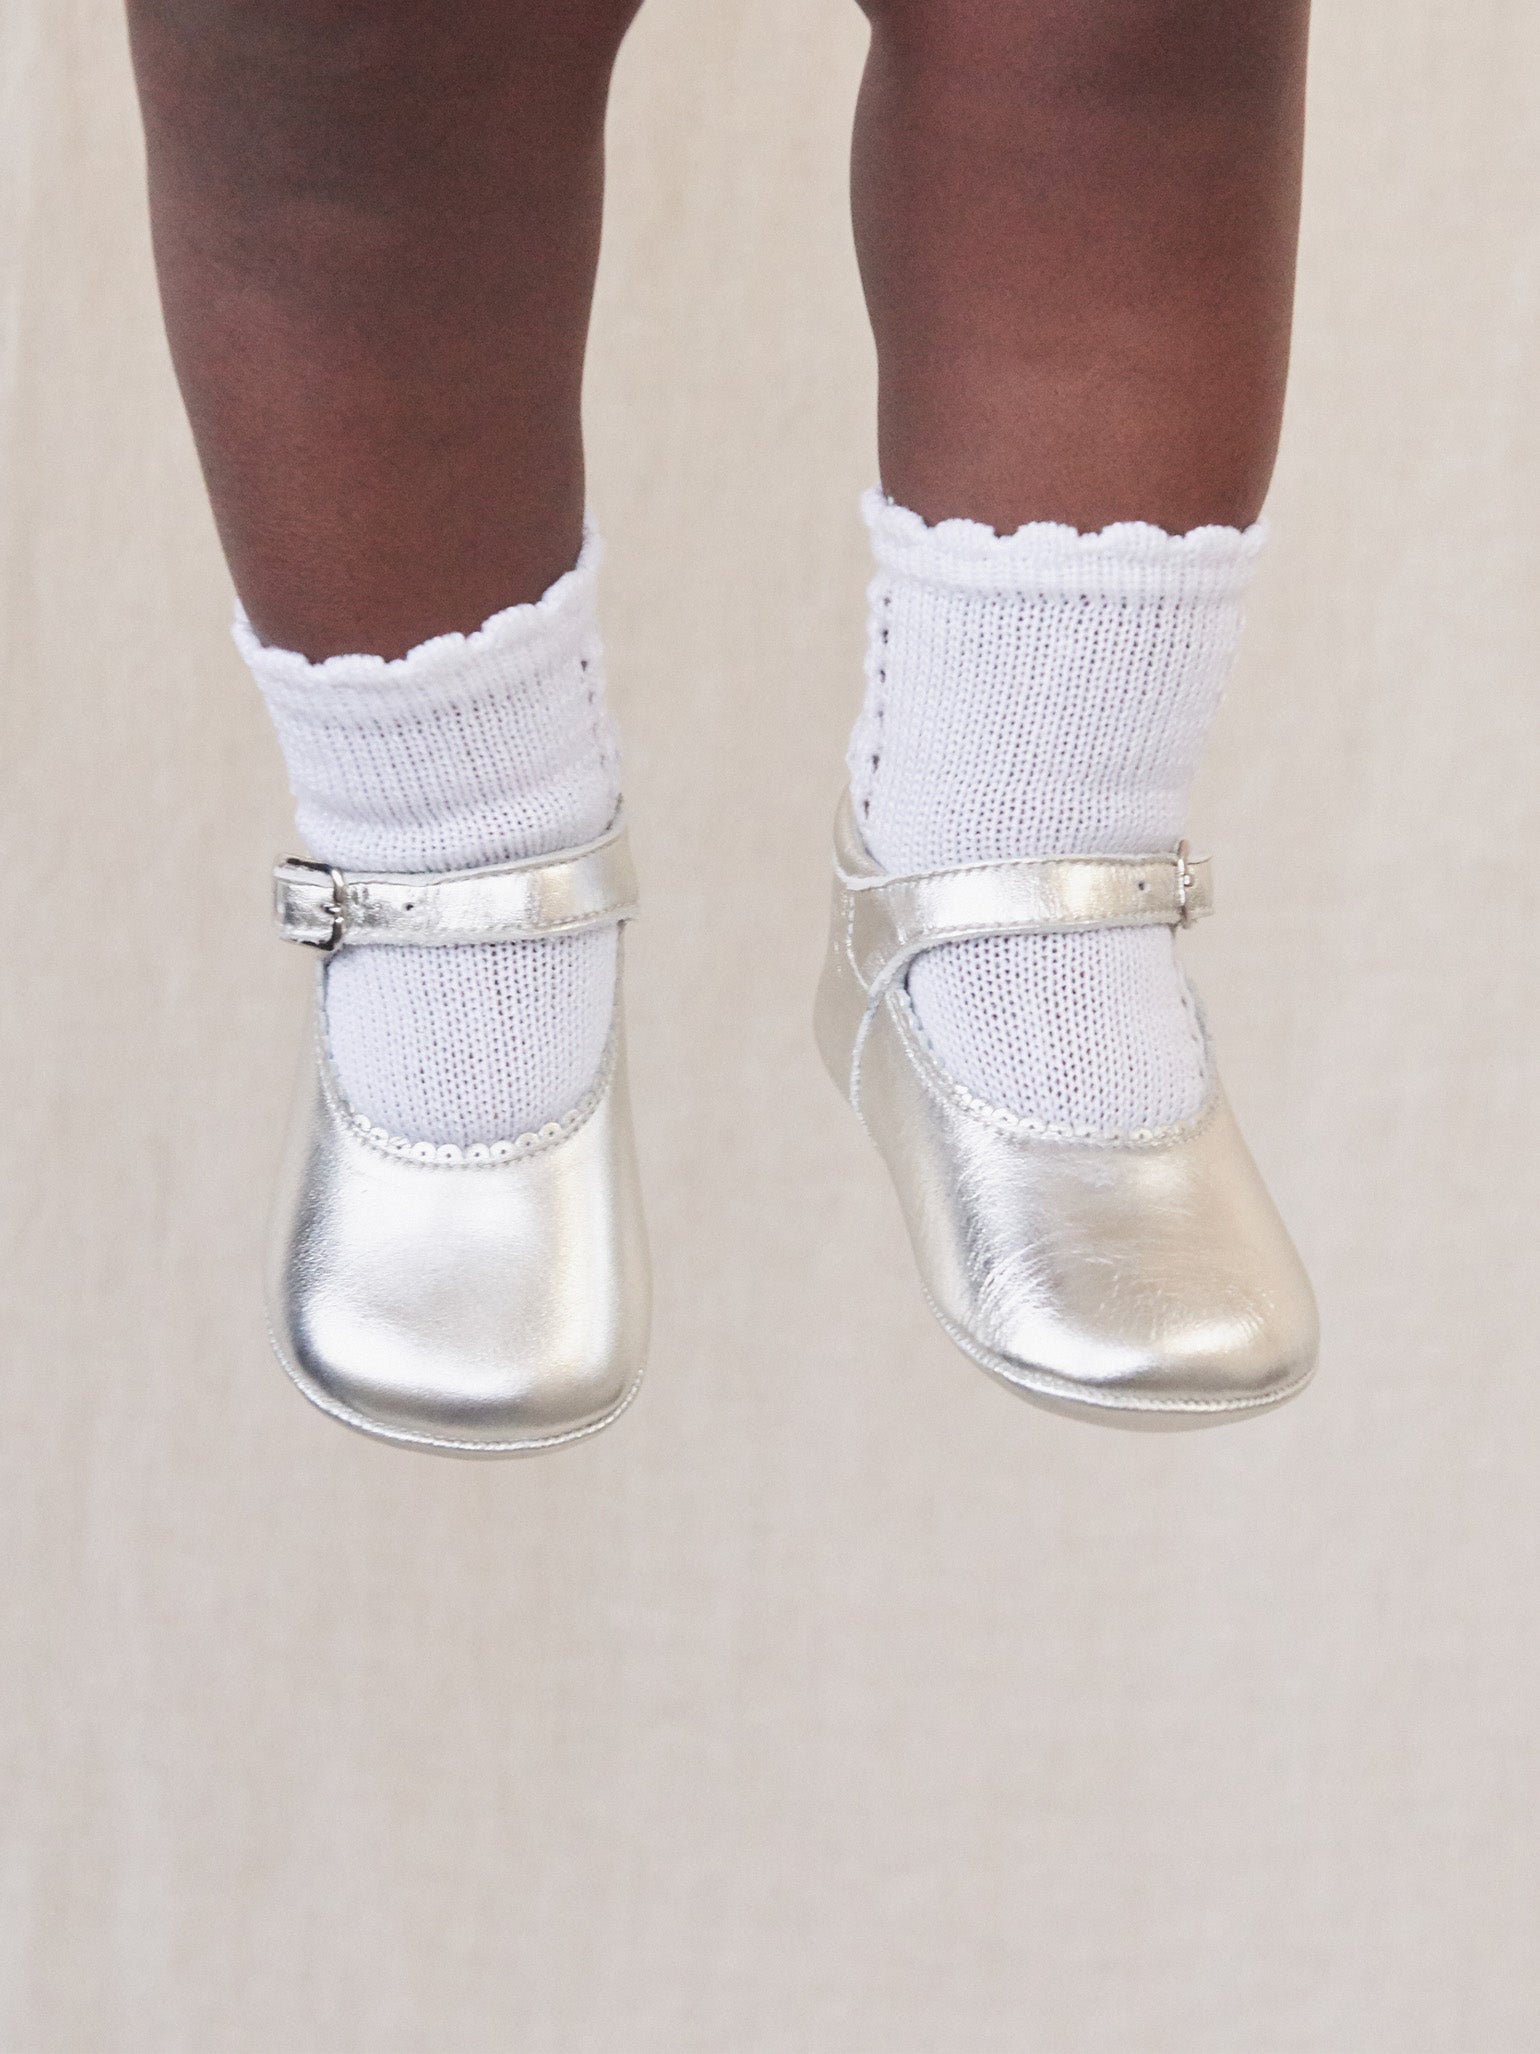 Silver Leather Baby Mary Jane Shoes